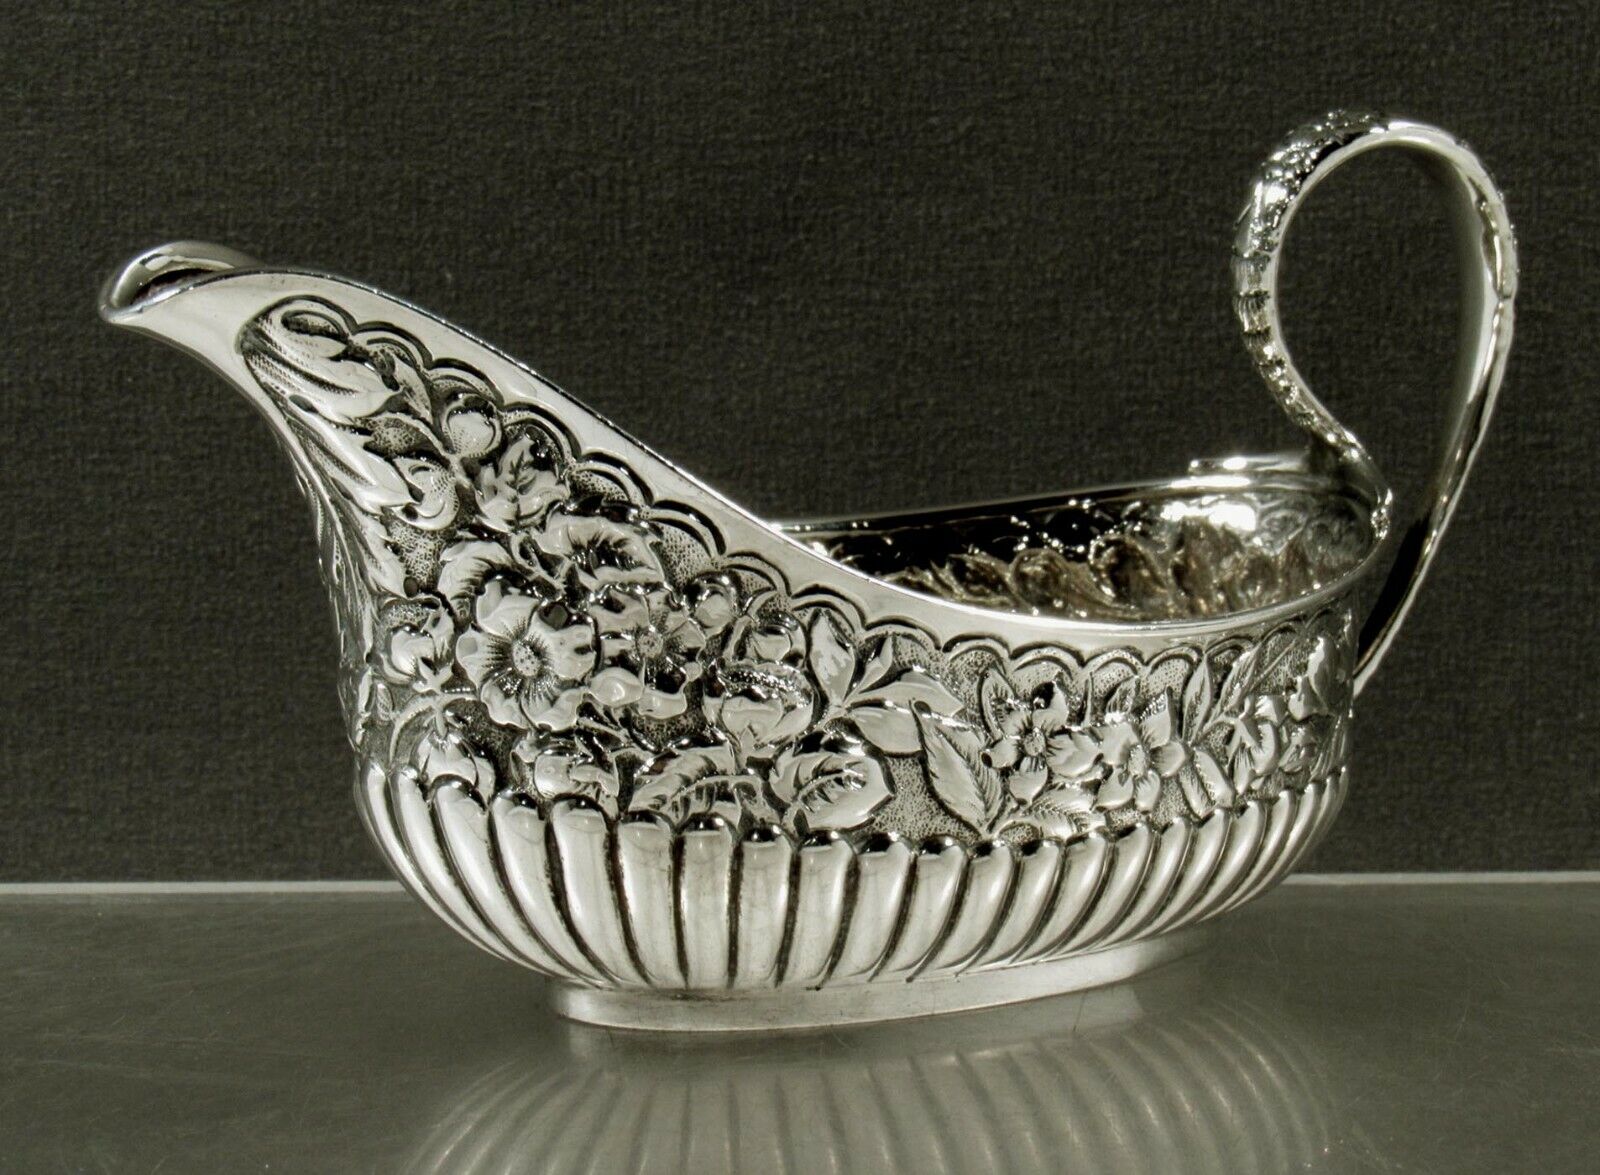 Tiffany Sterling Sauce Boat    c1870 HAND DECORATED